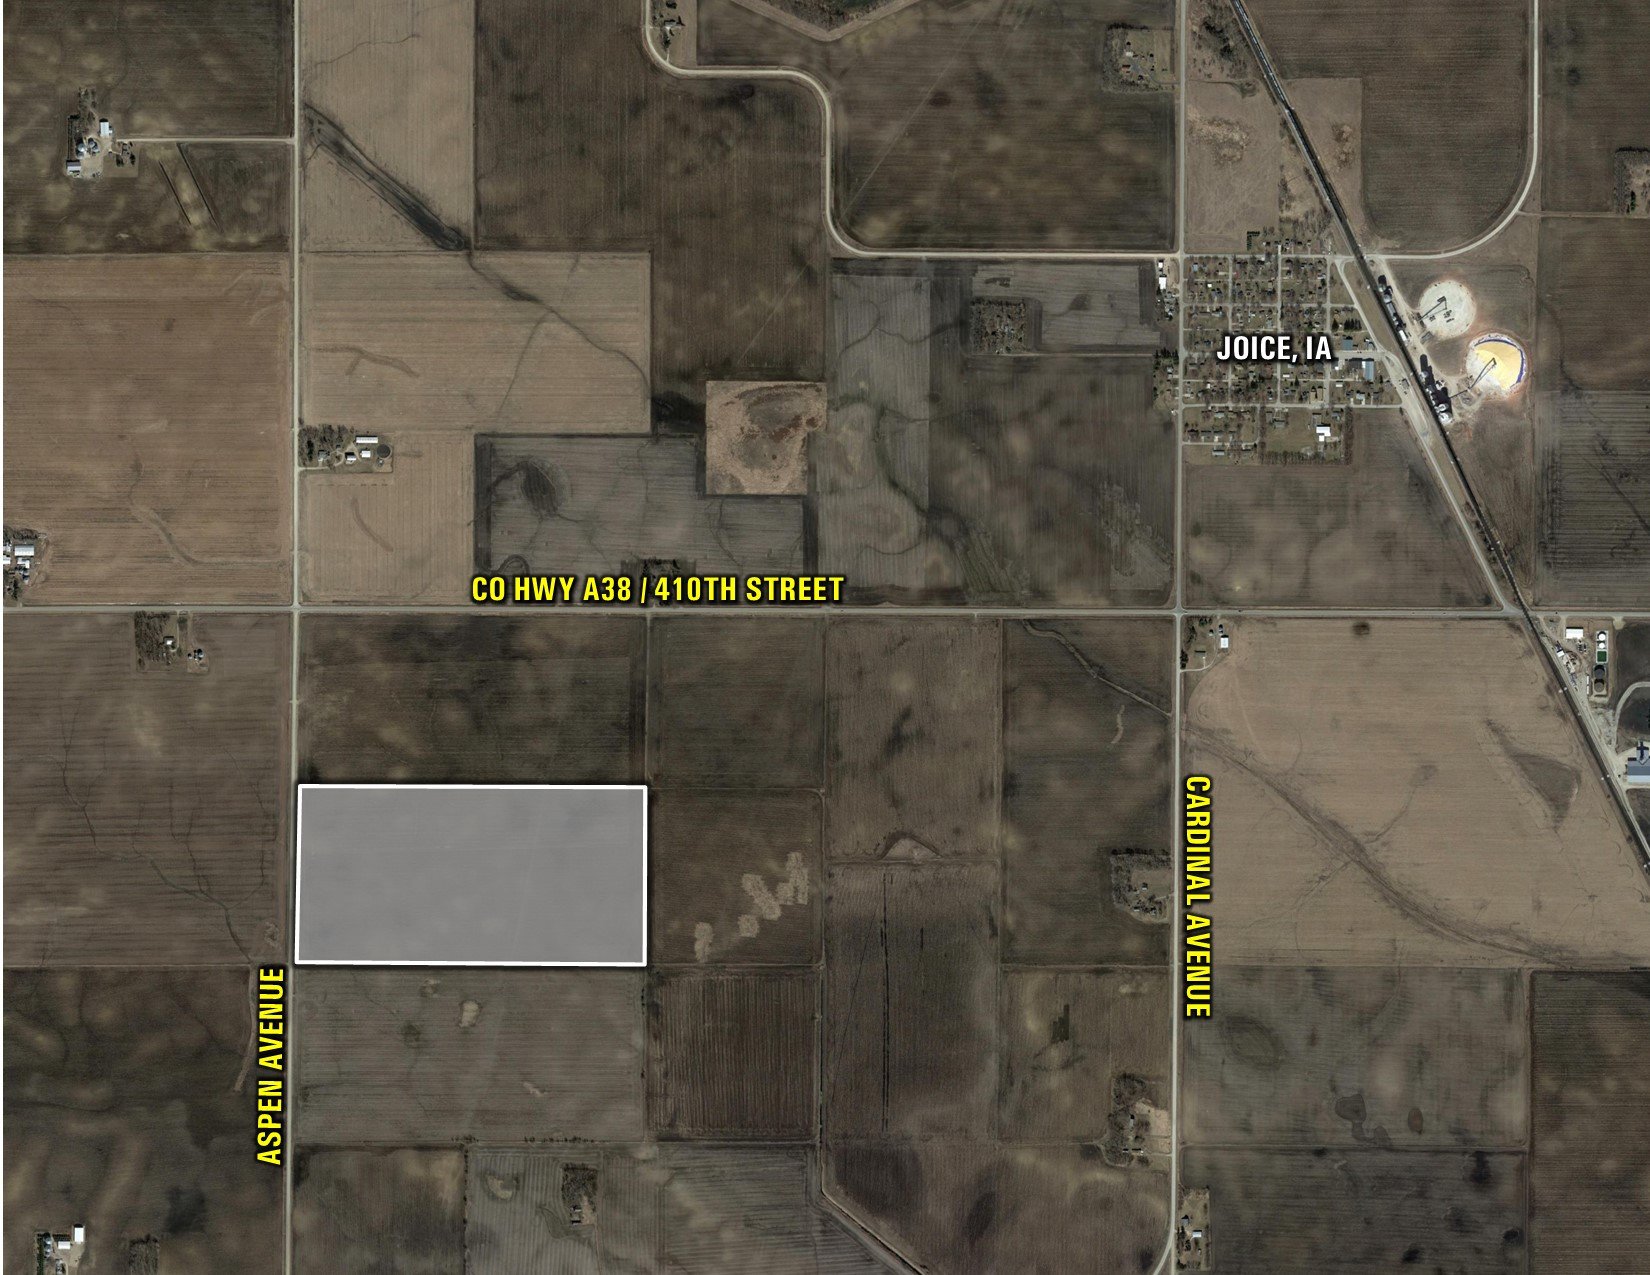 auctions-land-worth-county-iowa-81-acres-listing-number-16159-Google Far-1.jpg